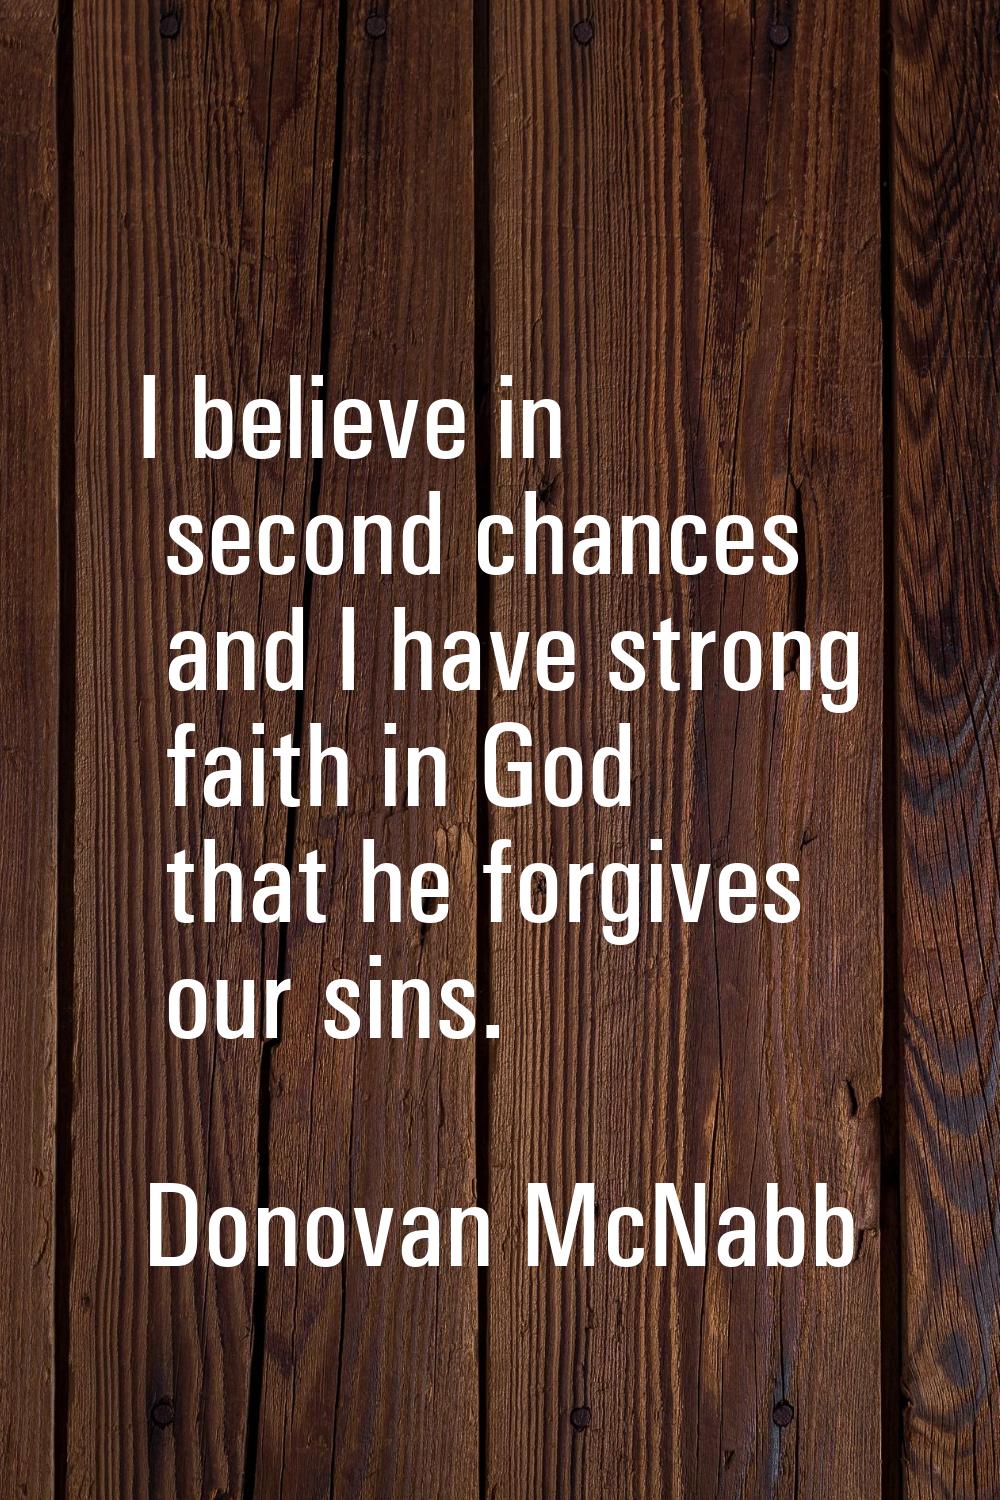 I believe in second chances and I have strong faith in God that he forgives our sins.